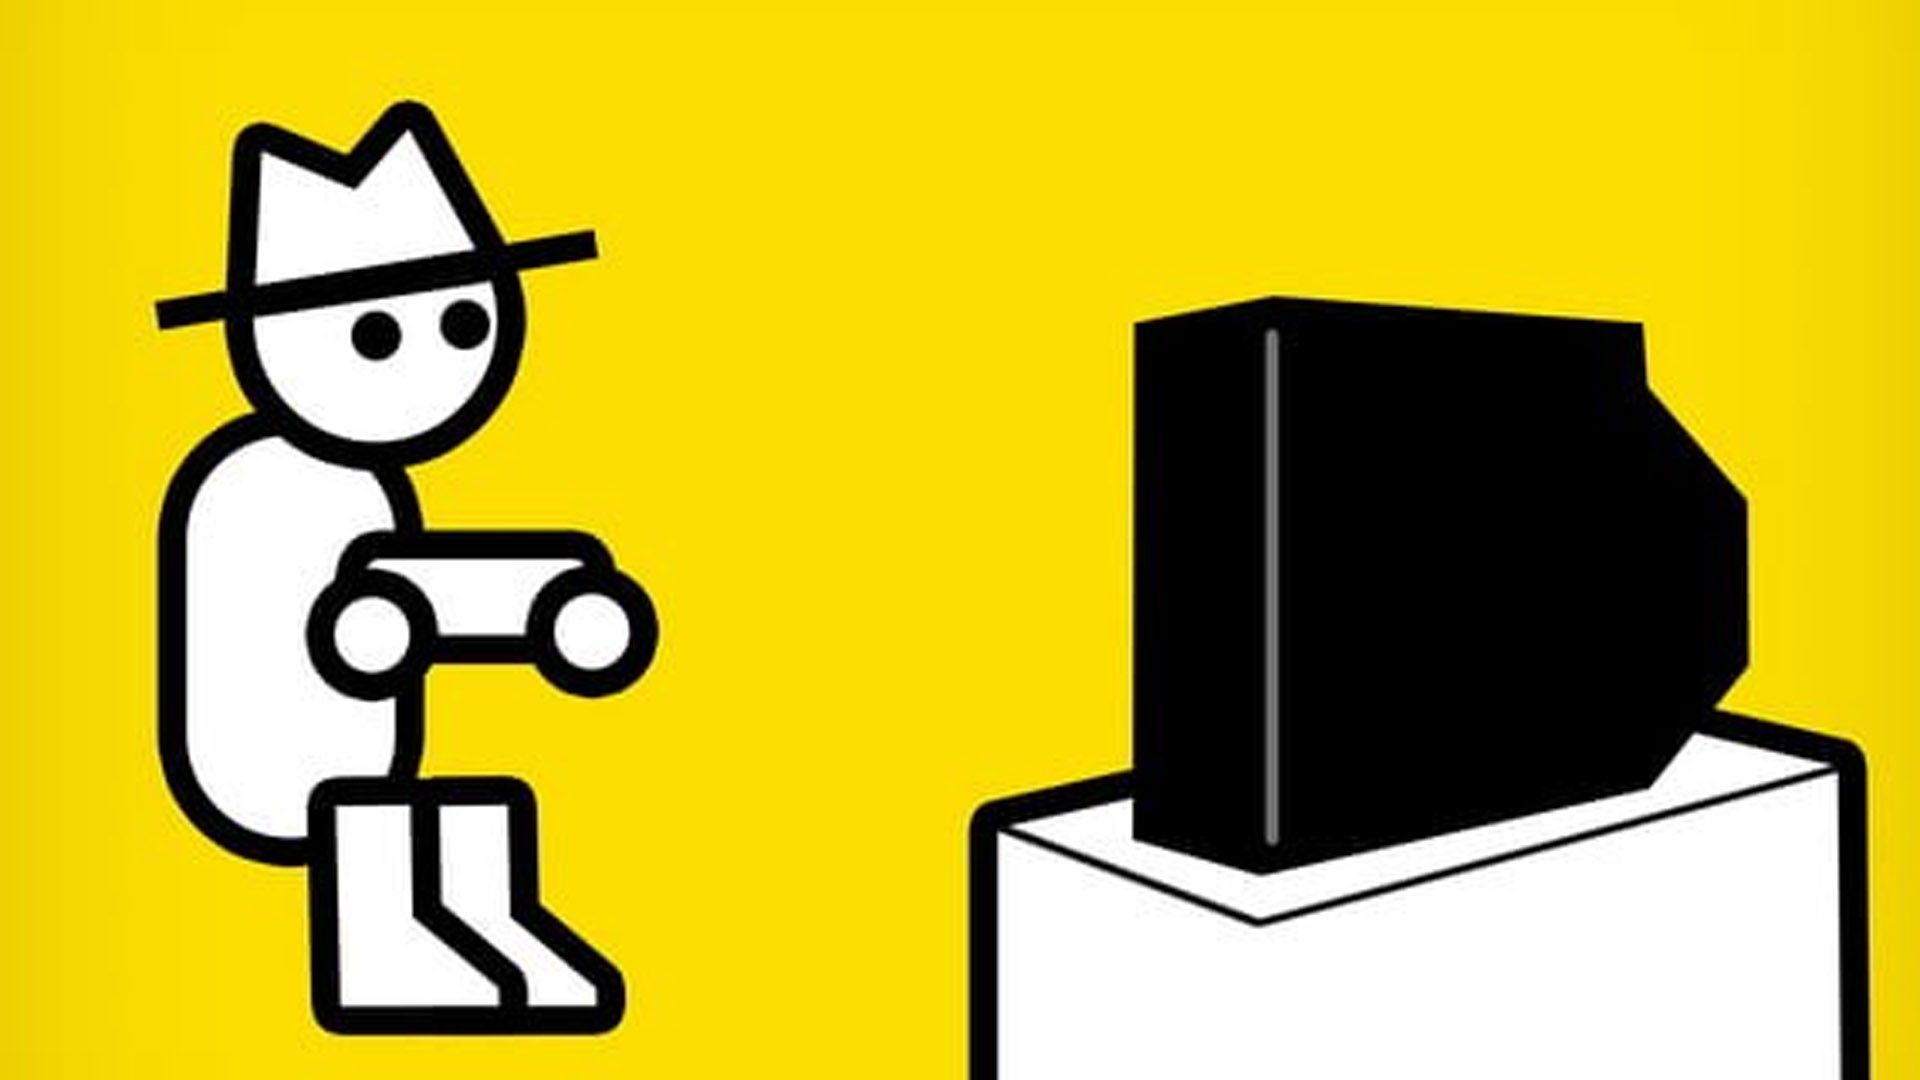 ‘Zero Punctuation’ game review series ends after 16 years